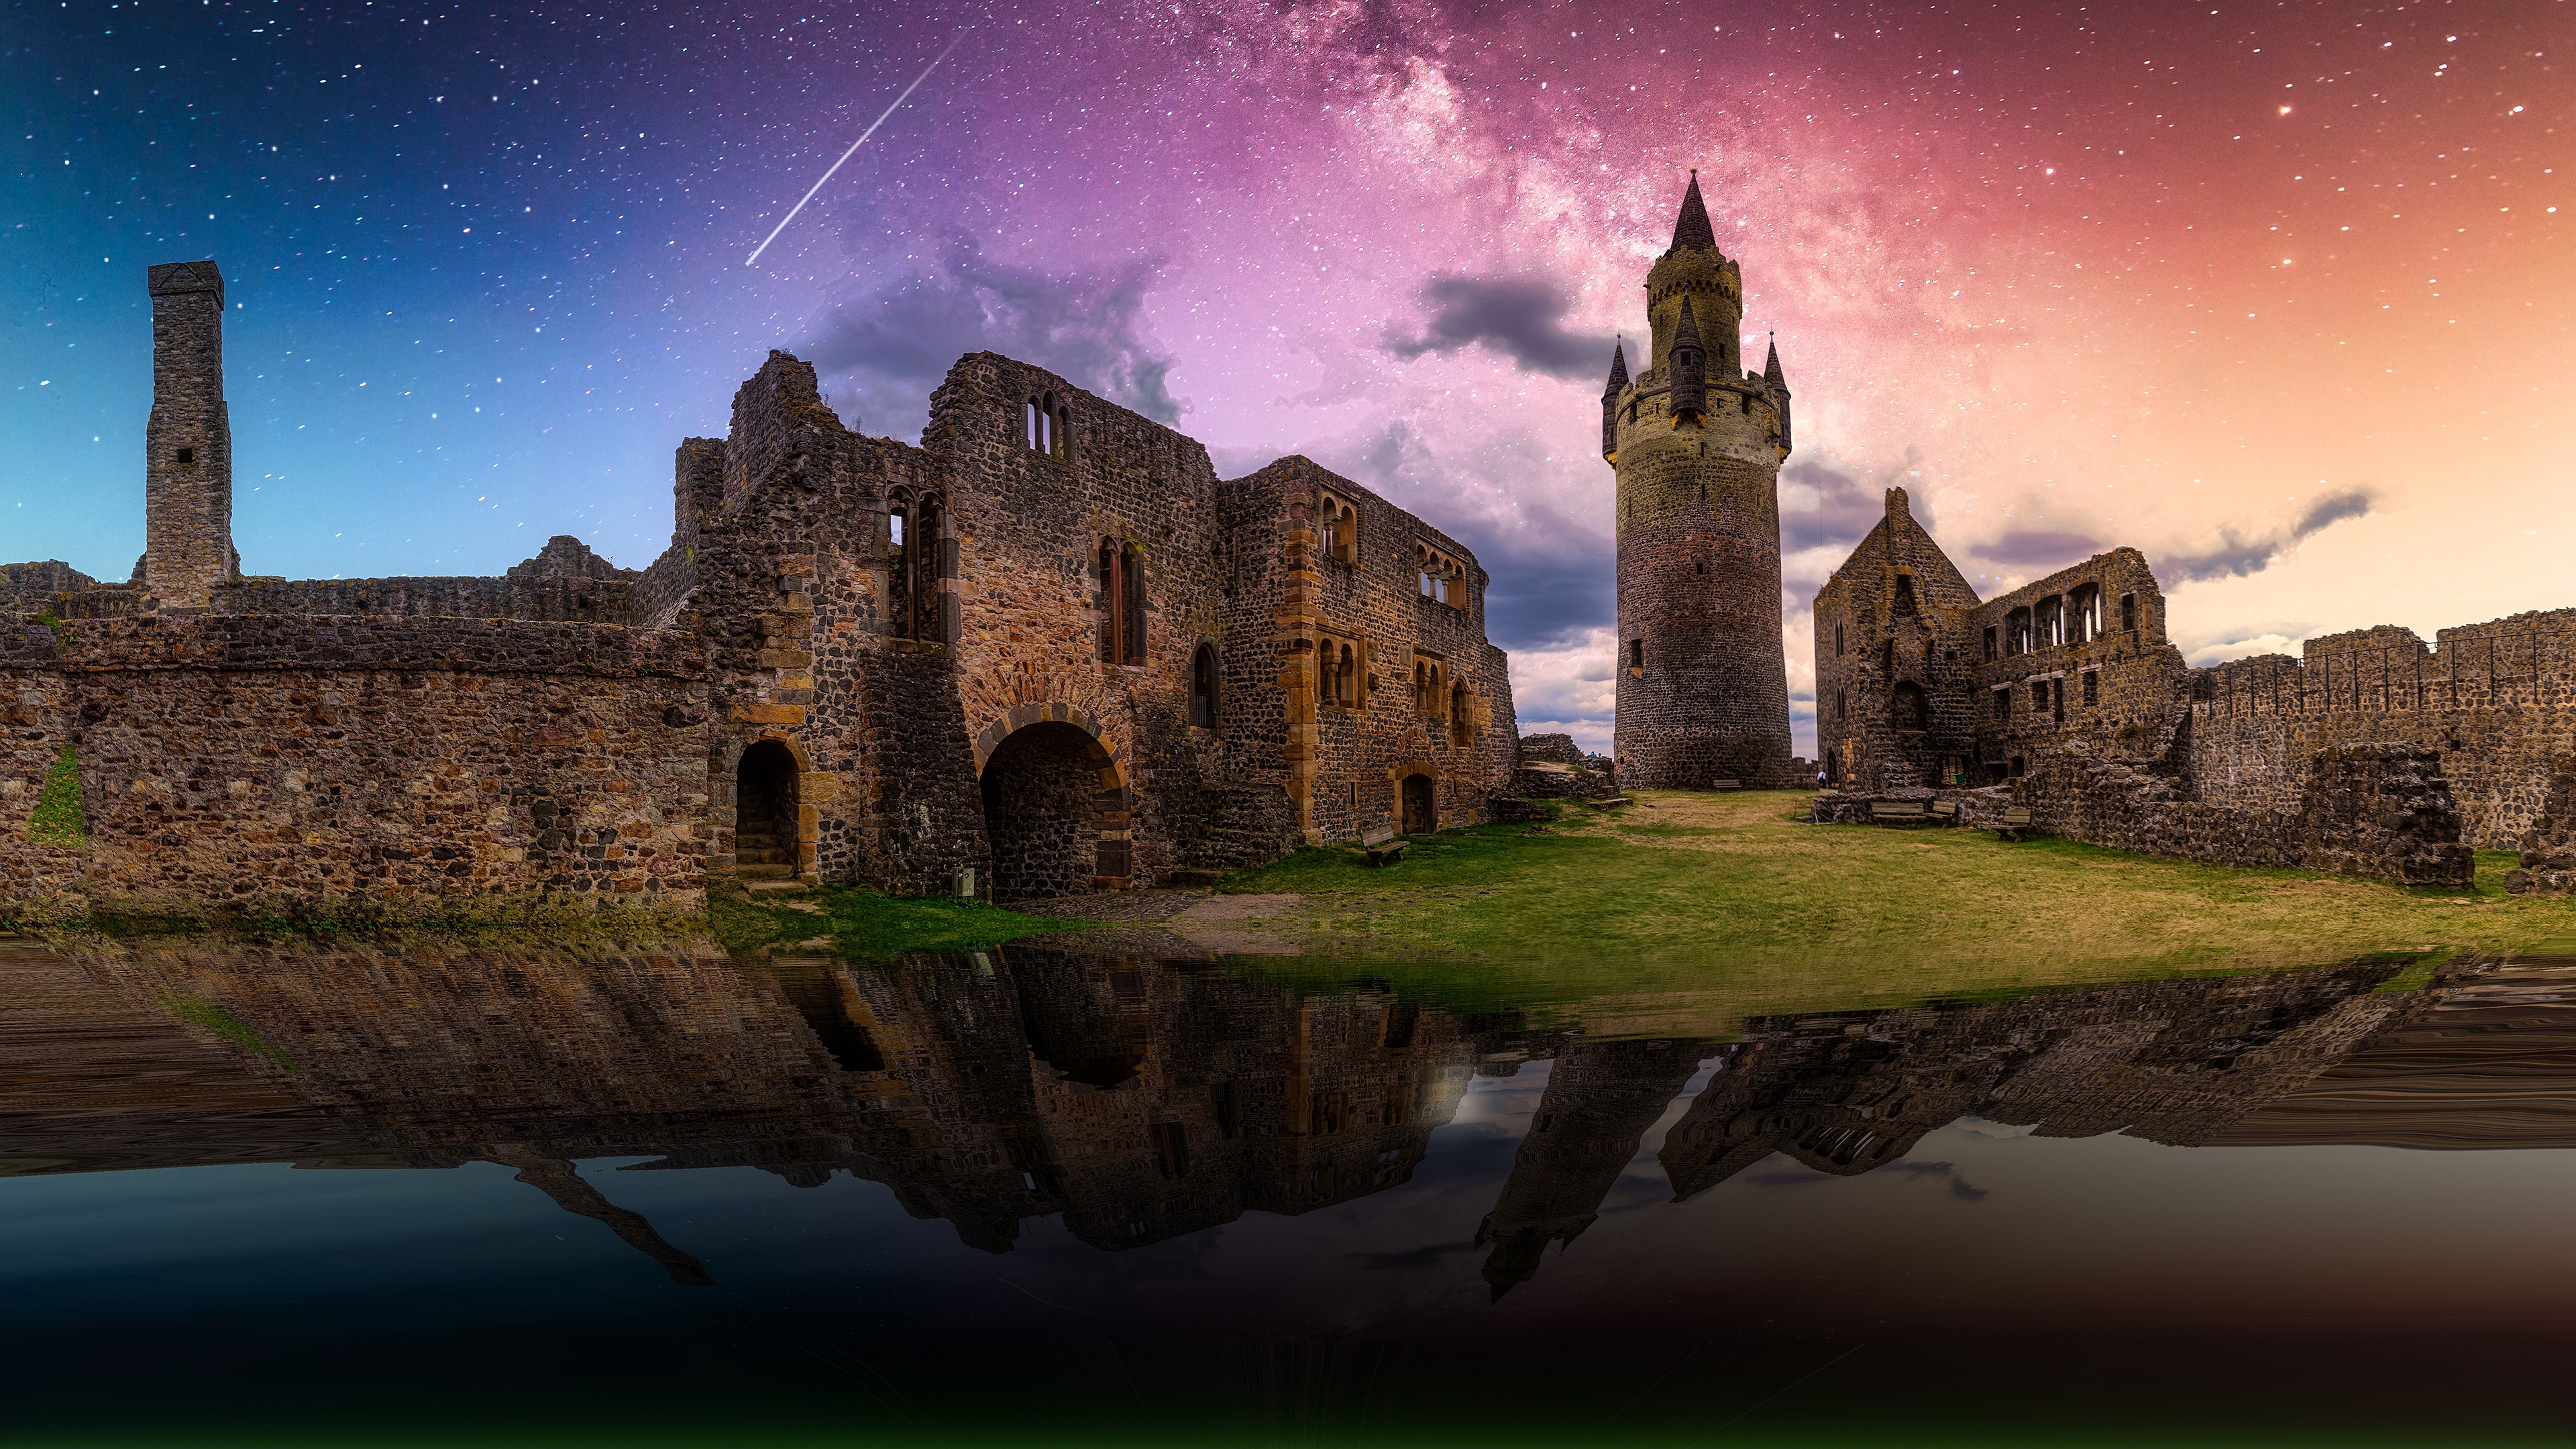 man made, ruin, architecture, castle, cloud, fortress, night, reflection, starry sky, stars iphone wallpaper